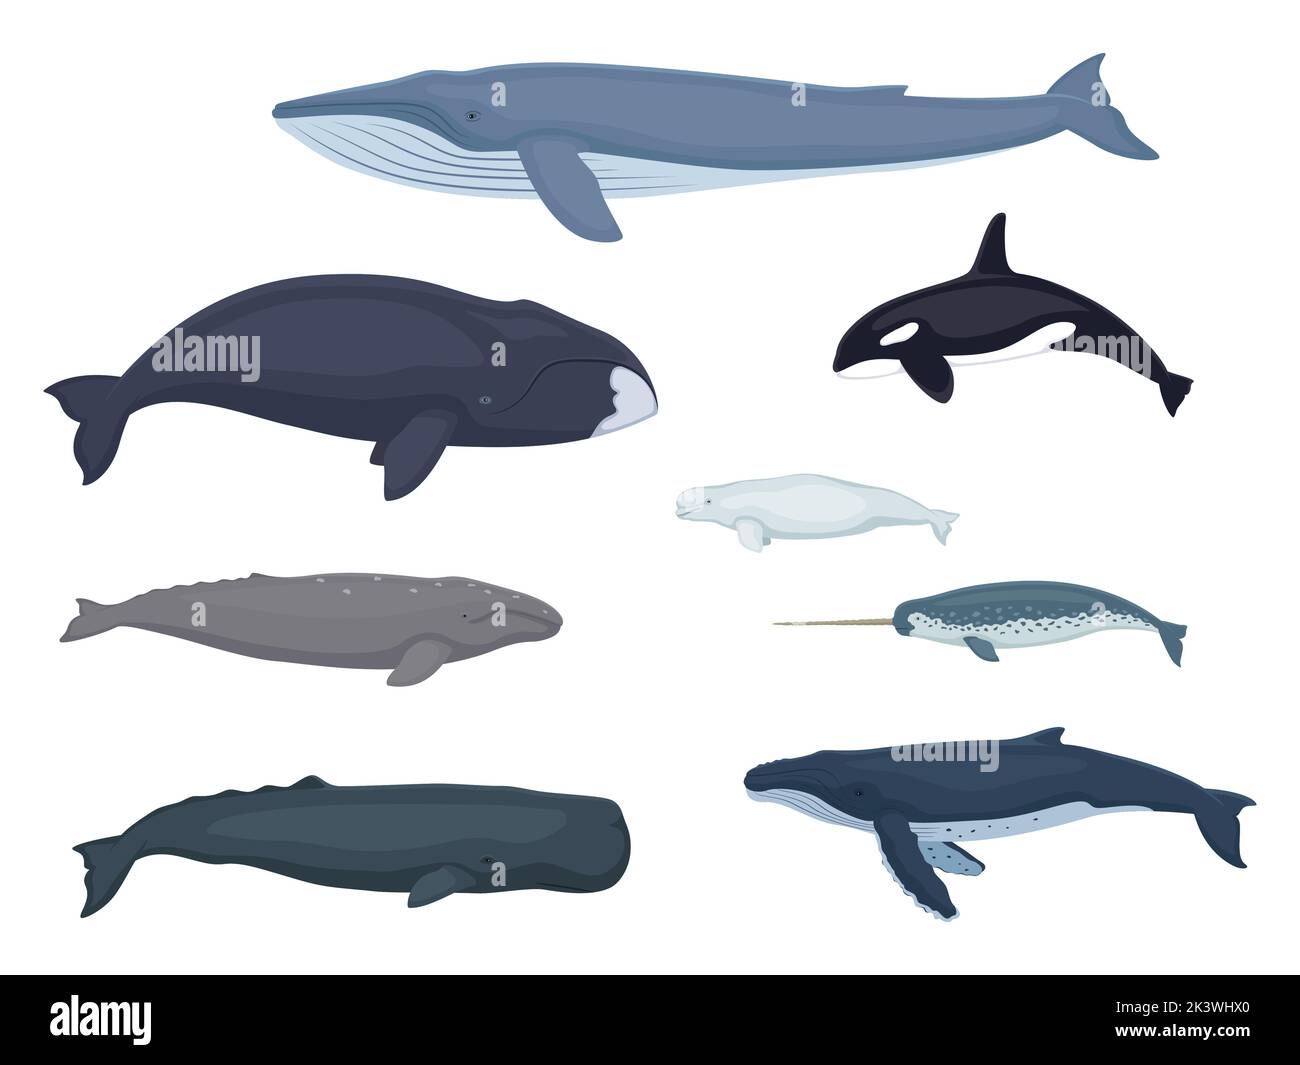 Whale set. Beluga, gray, bowhead, blue, narwhal, humpback, sperm, killer whale. Vector illustration group of different sea animals isolated on white. Stock Vector